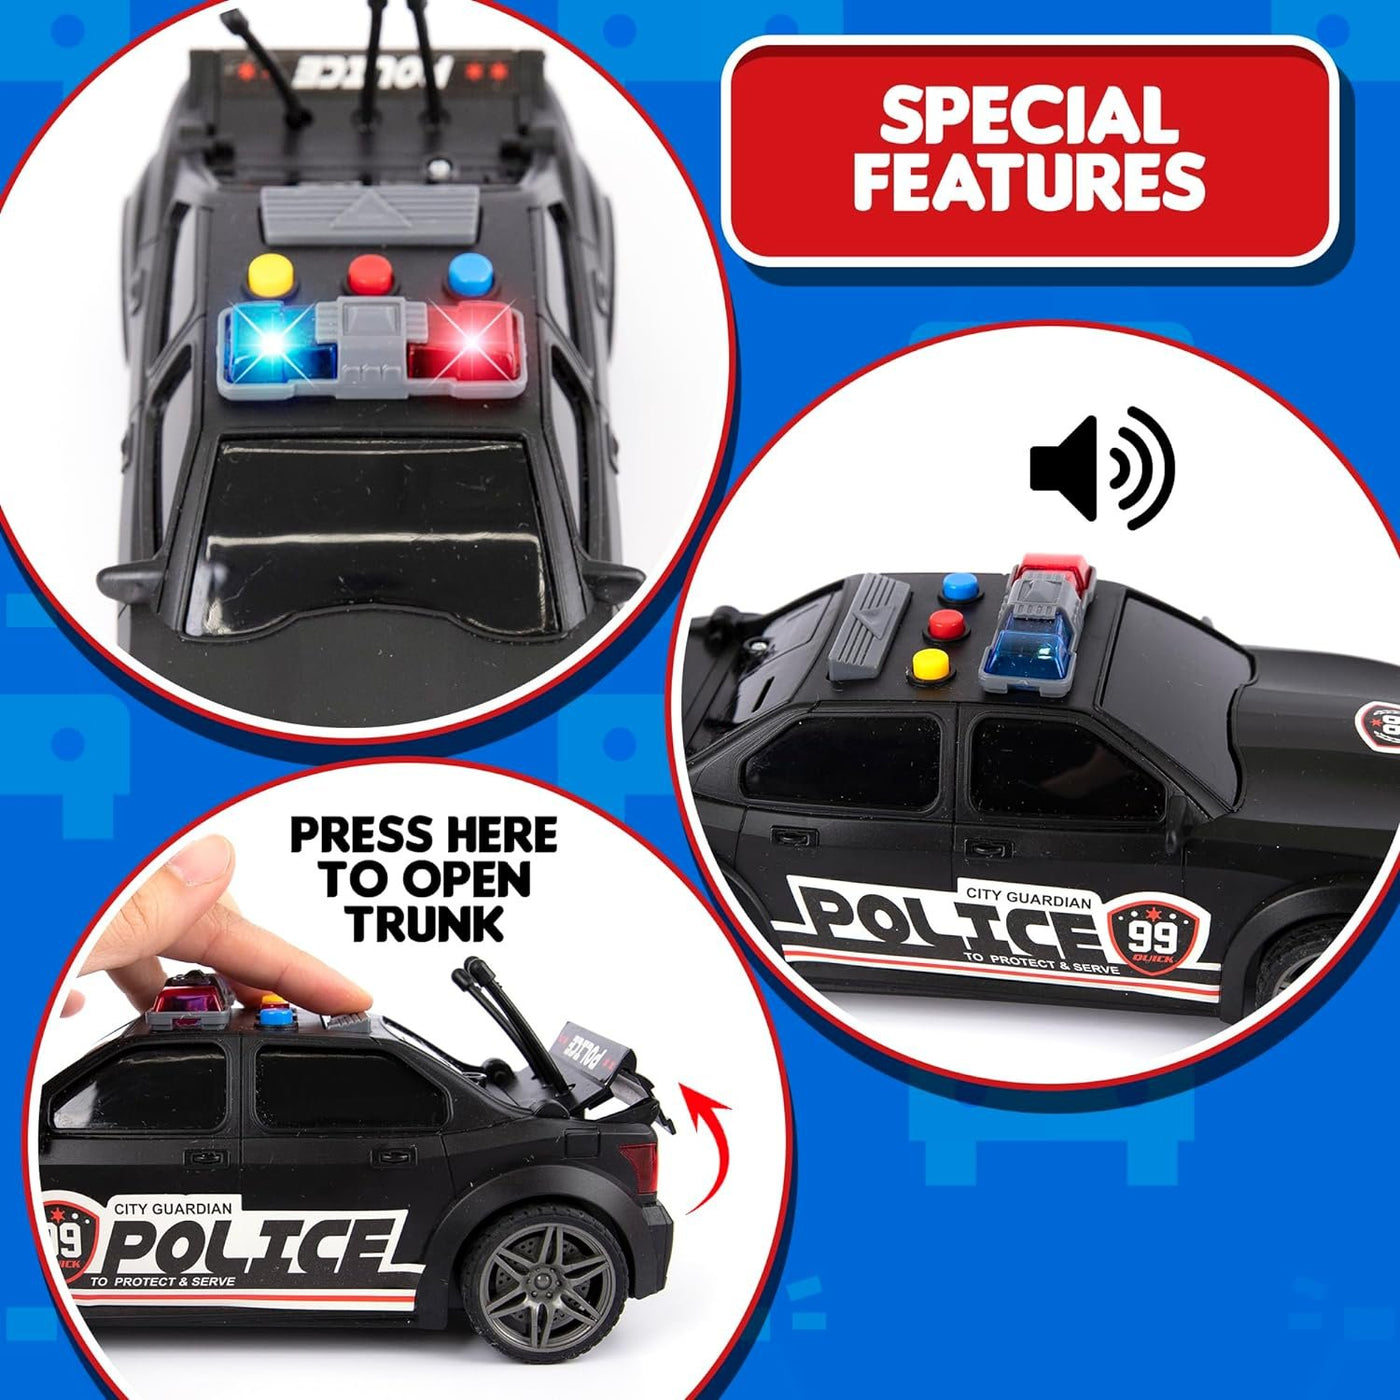 Police Car Toys for Boys 3,4,5 with Lights & Siren Sounds, Friction Powered Police Car for Kids with Flashing Lights, 3 Different Sounds, & Openable Trunk, Police Pretend Play Toys, Police Car Toy